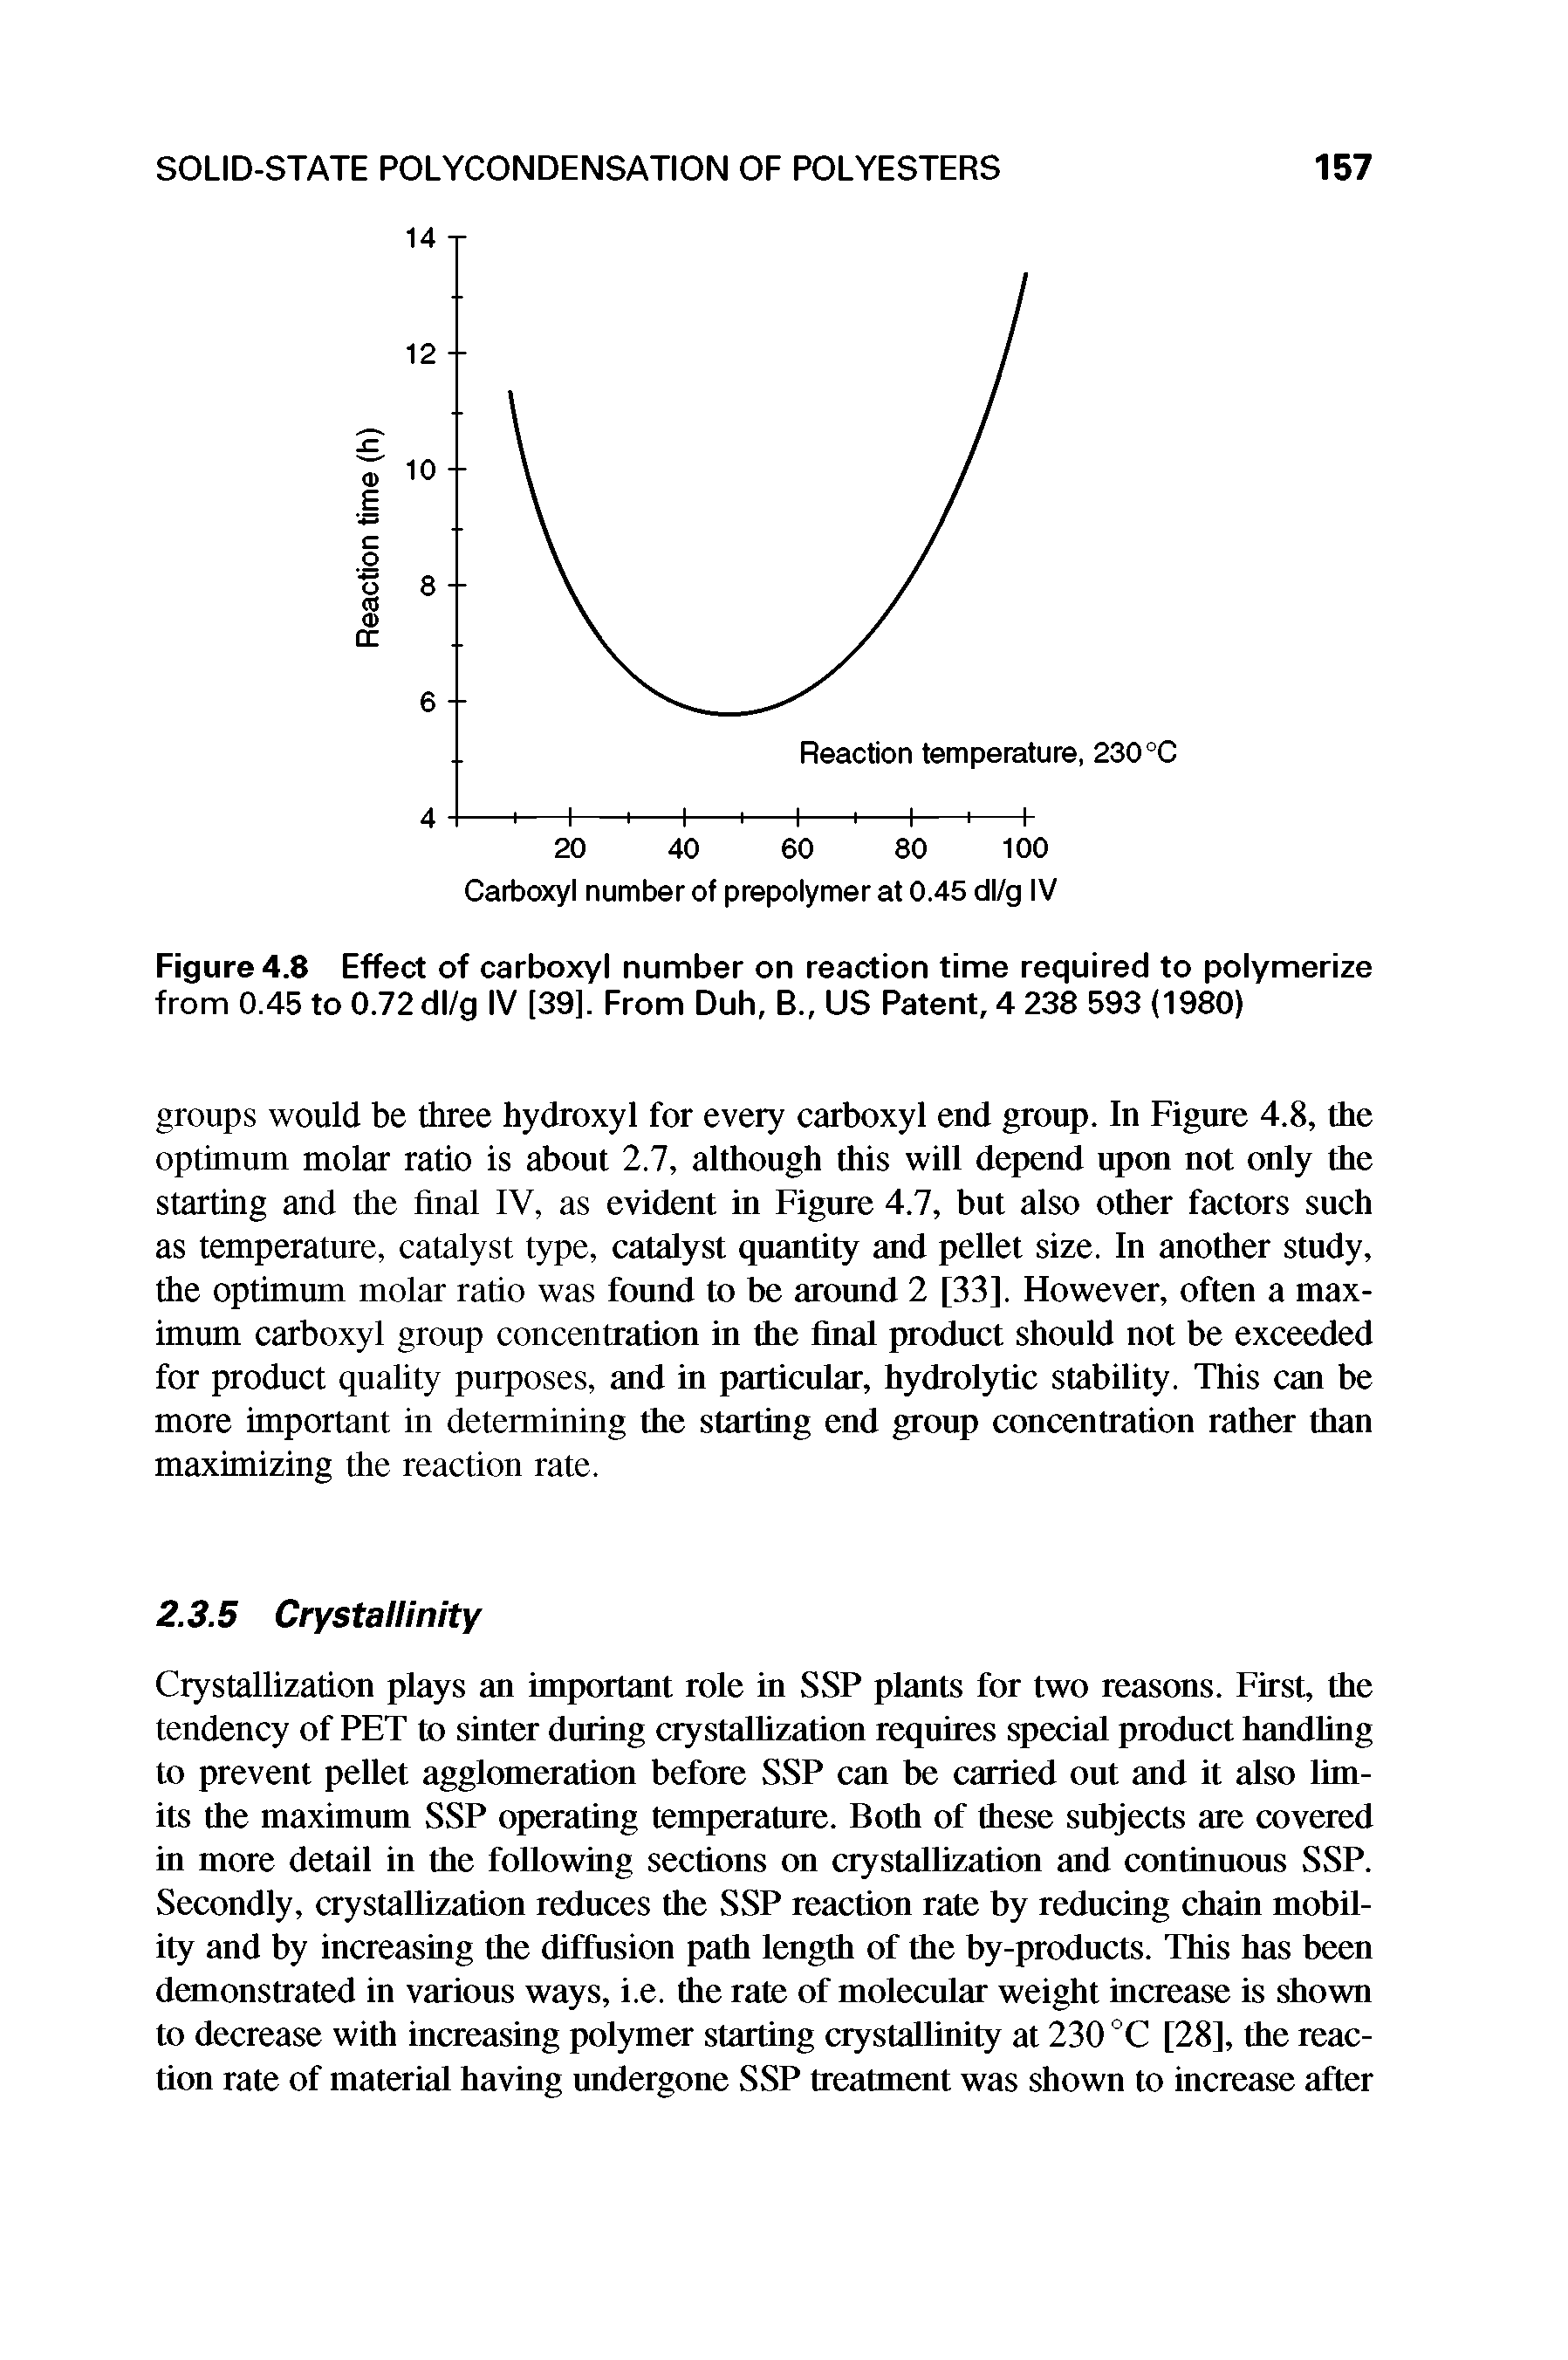 Figure 4.8 Effect of carboxyl number on reaction time required to polymerize from 0.45 to 0.72 dl/g IV [39]. From Duh, B., US Patent, 4 238 593 (1980)...